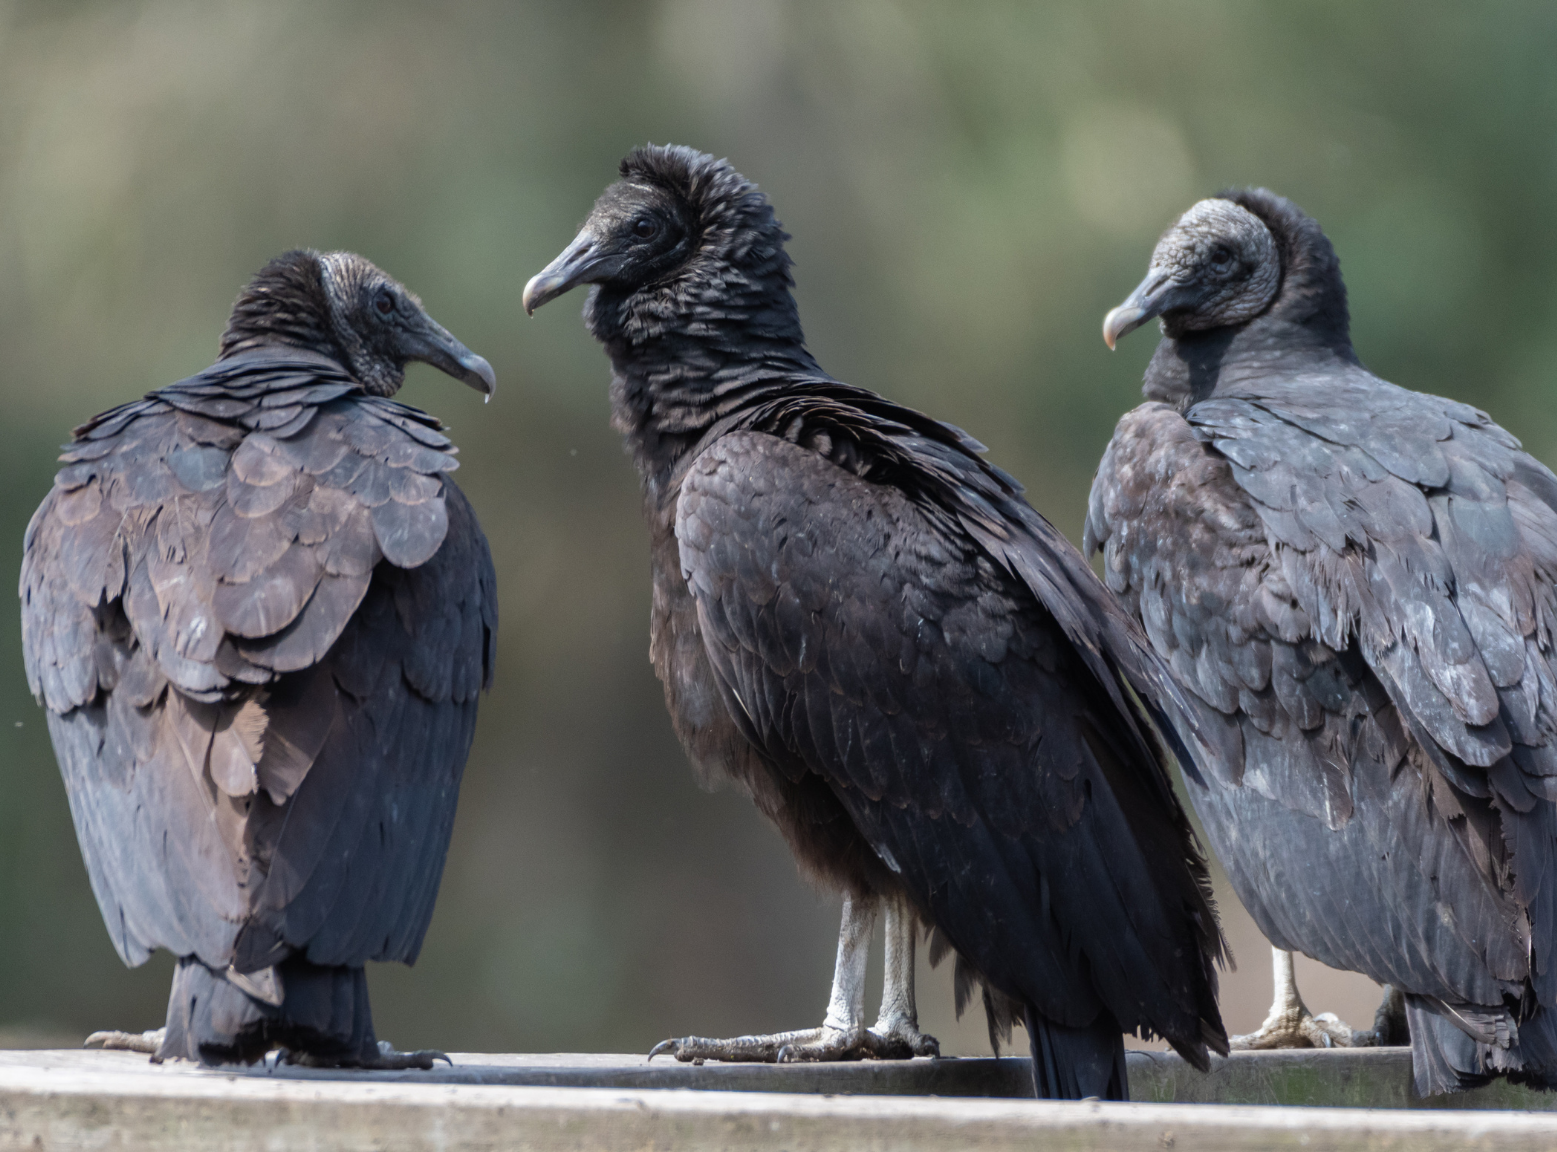 High Path Avian Influenza Confirmed In Black Vultures, Poultry Producers  Encouraged To Take Precautions - State of Delaware News